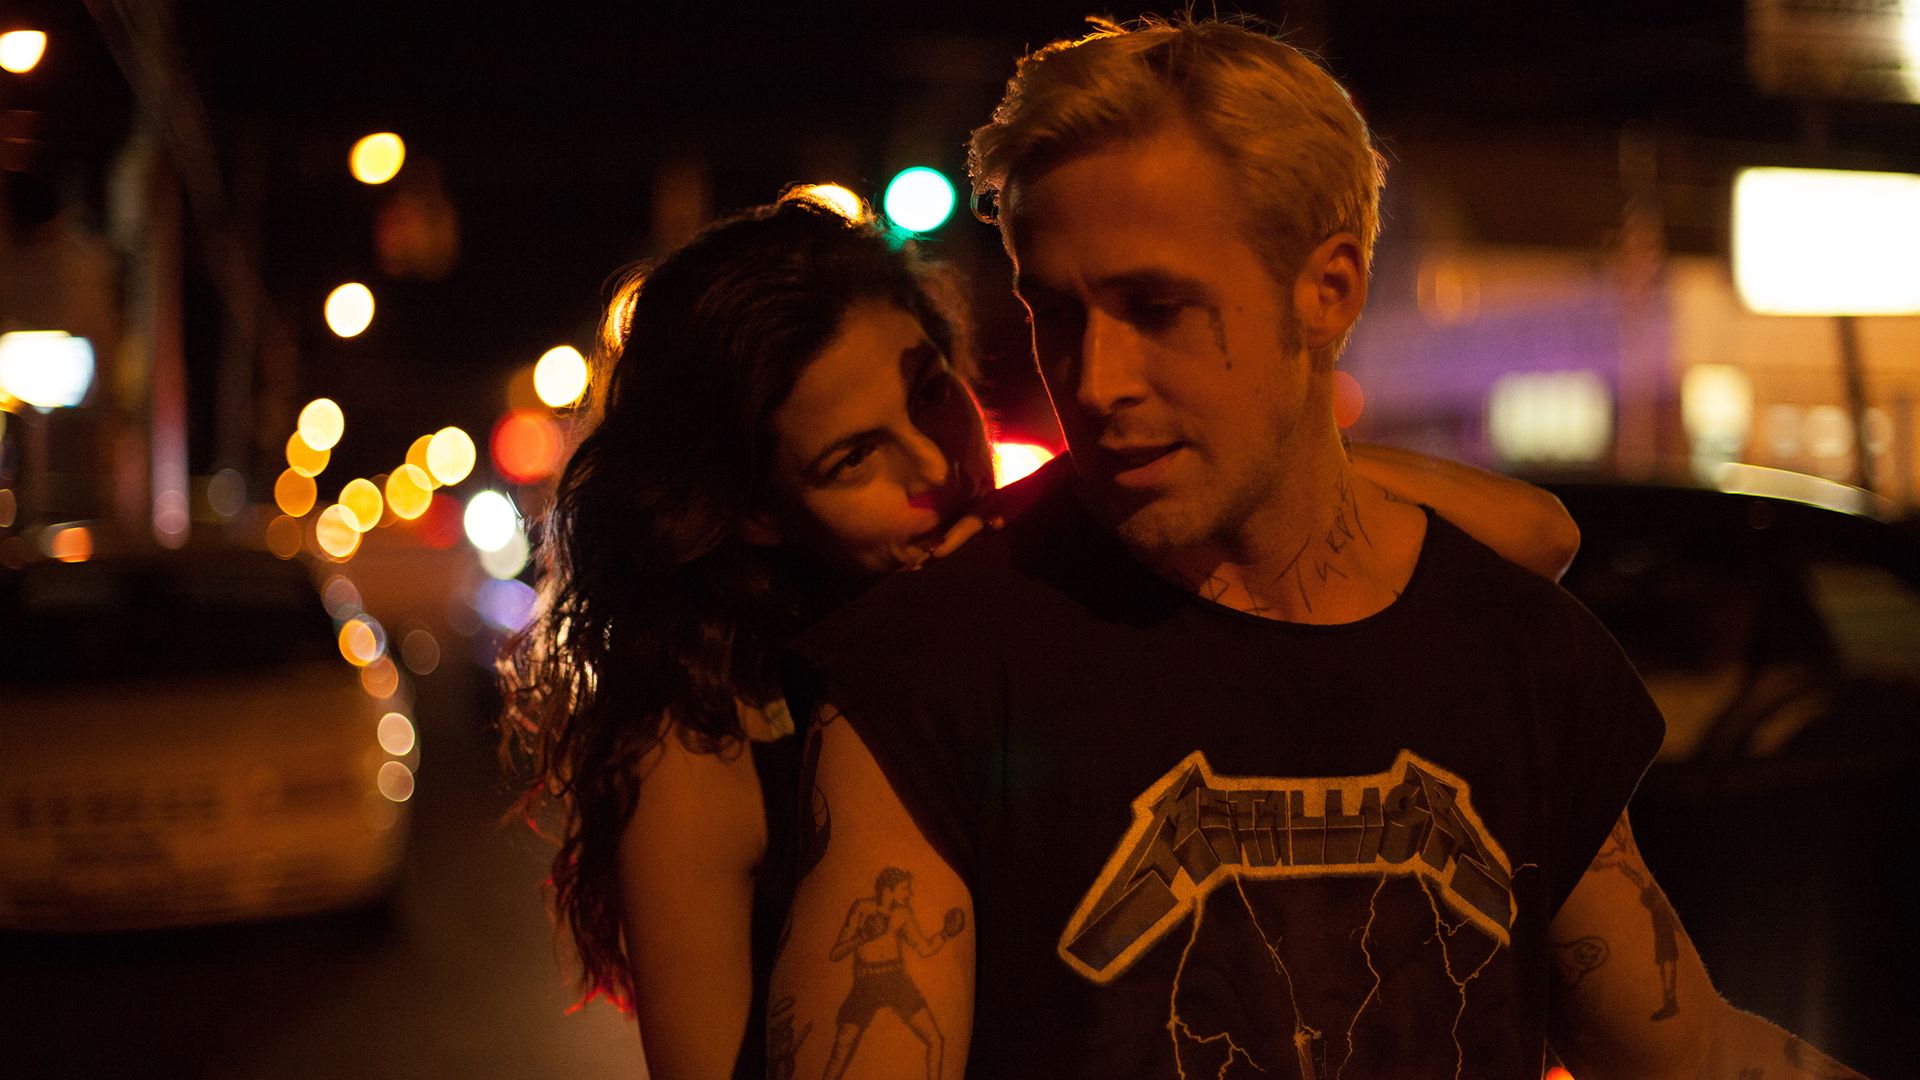 Ryan stars alongside Eva Mendes in The Place Beyond The Pines